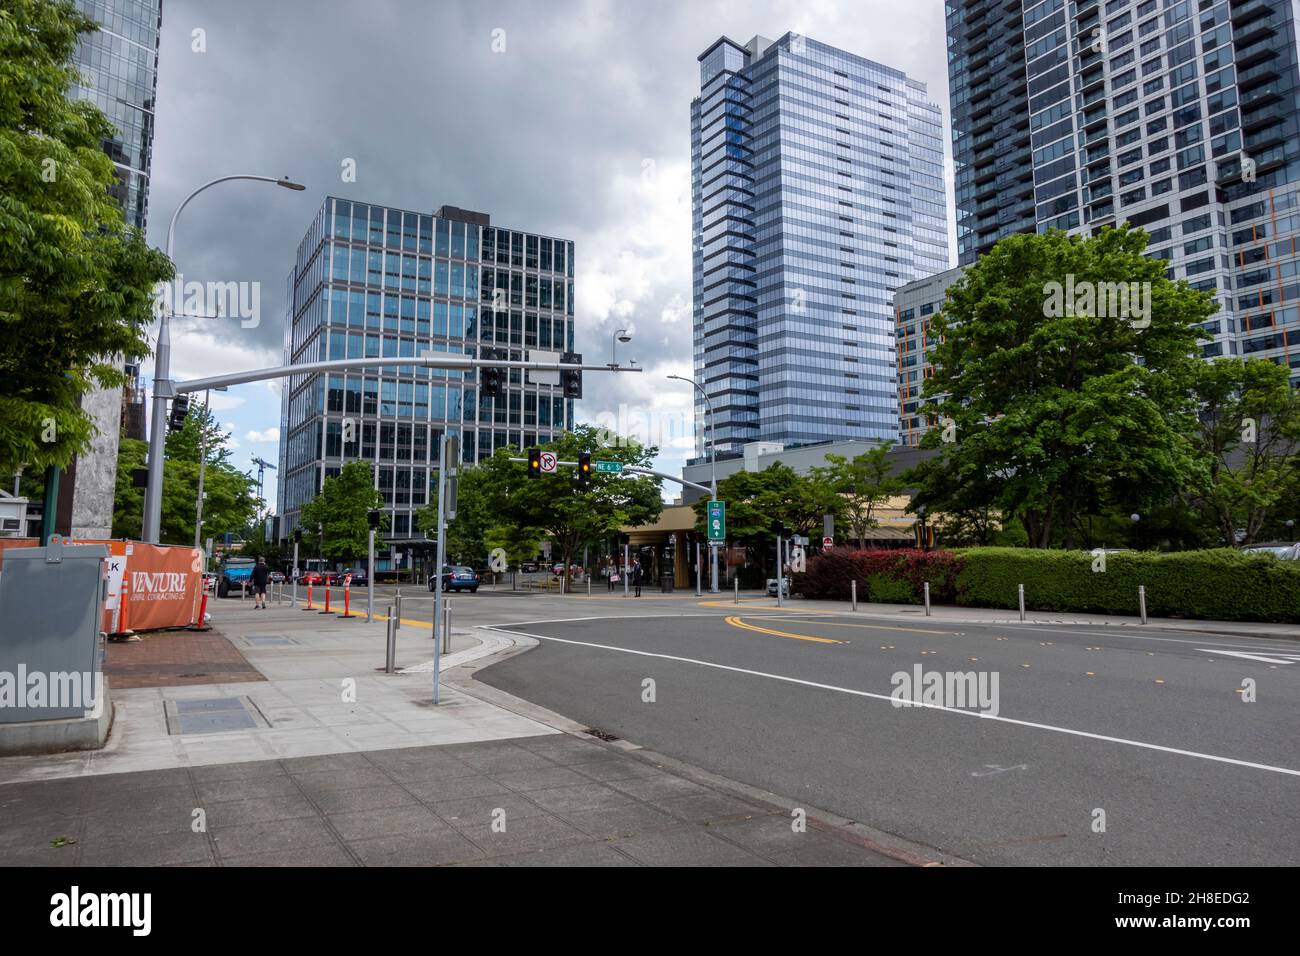 Bellevue, WA USA - circa June 2021: Street view of downtown Bellevue traffic near a construction site on an overcast day Stock Photo